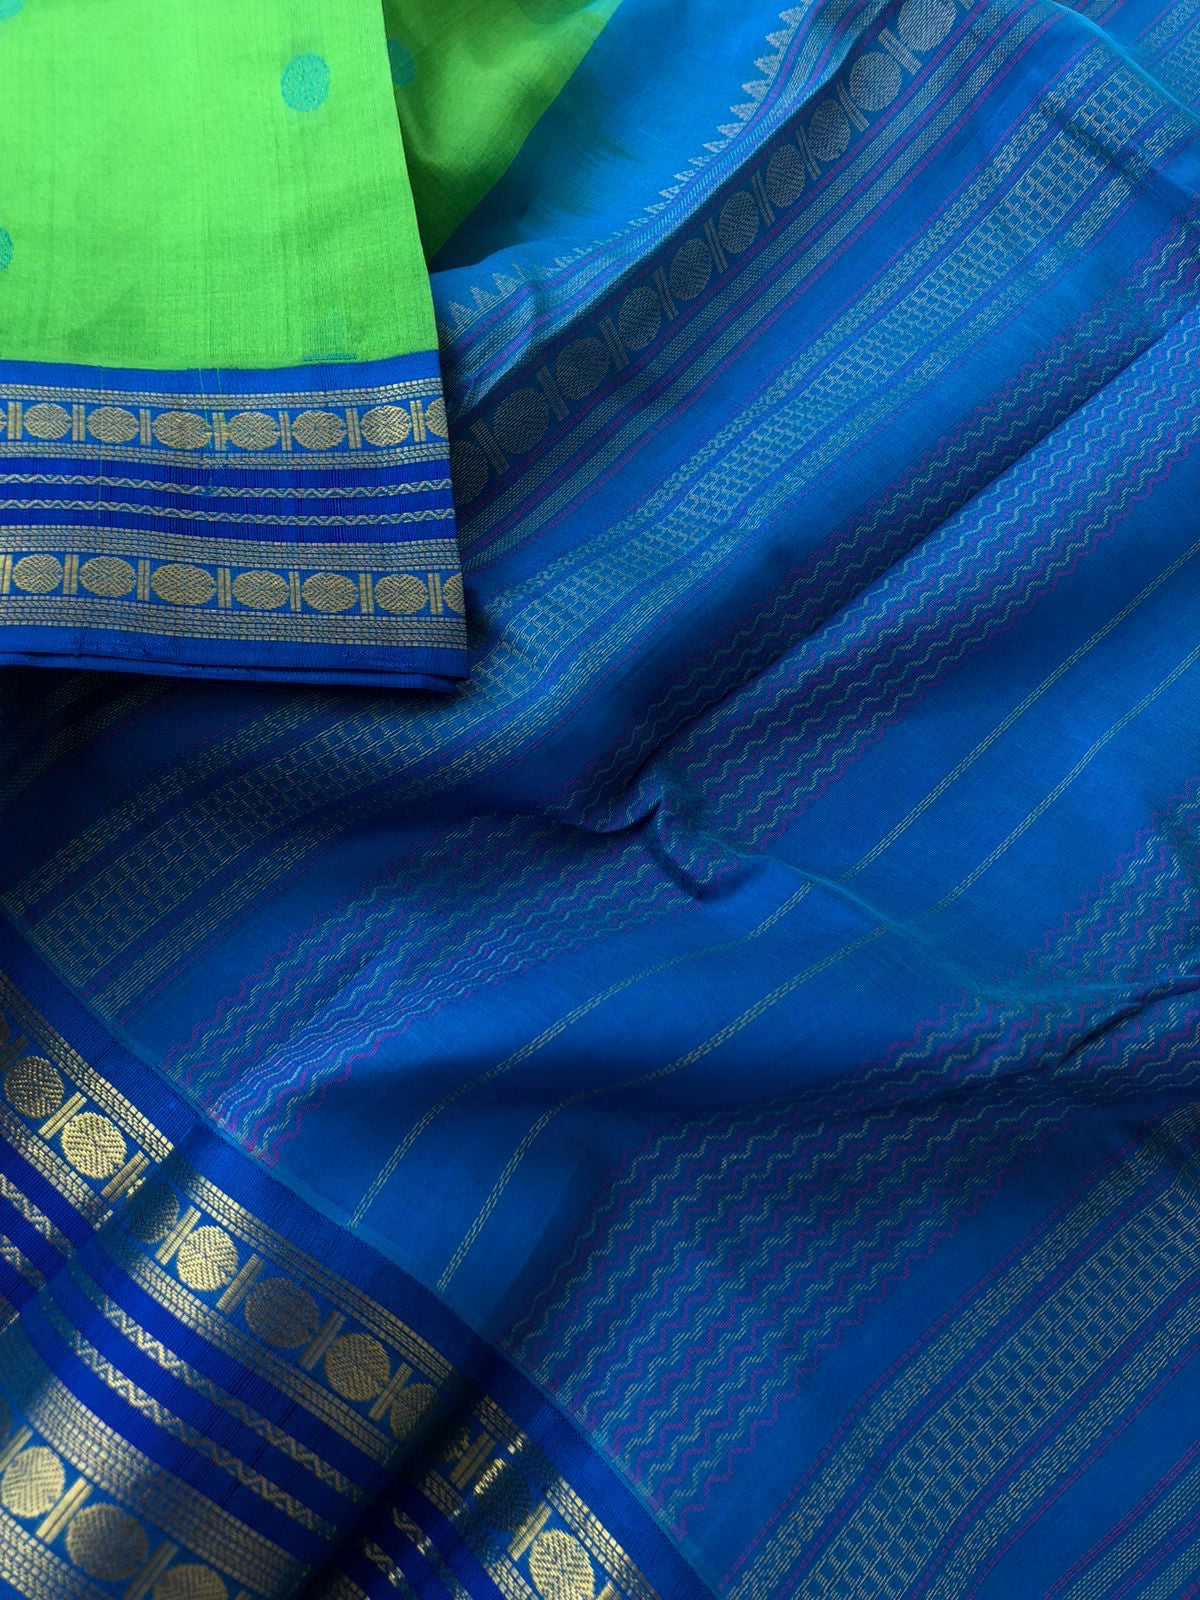 Divyam - Korvai Silk Cotton with Pure Silk Woven Borders - beautiful apple green and blue